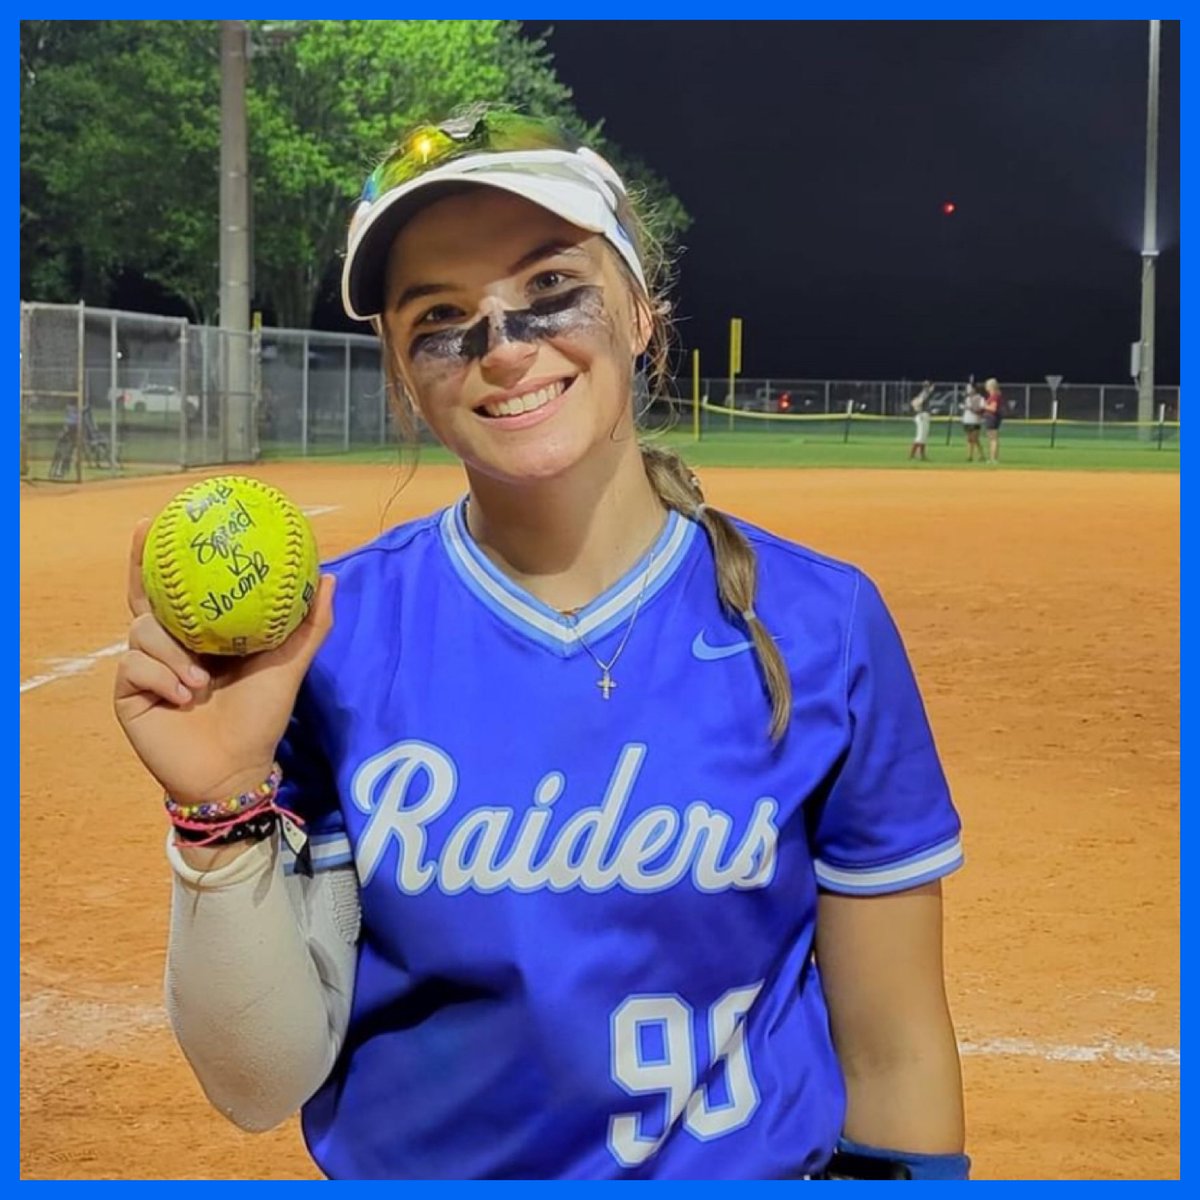 Jadyn Rausch (2025 - Southern Miss commit) with another Home Run to help Houston Academy secure the Area Championship.. Season to date, Jadyn is hitting .435 with 47 hits including 9 Doubles, 4 Triples, 5 Home Runs and 54 RBI’s Great work J!!! @J_Rausch2025 @lbpowell12